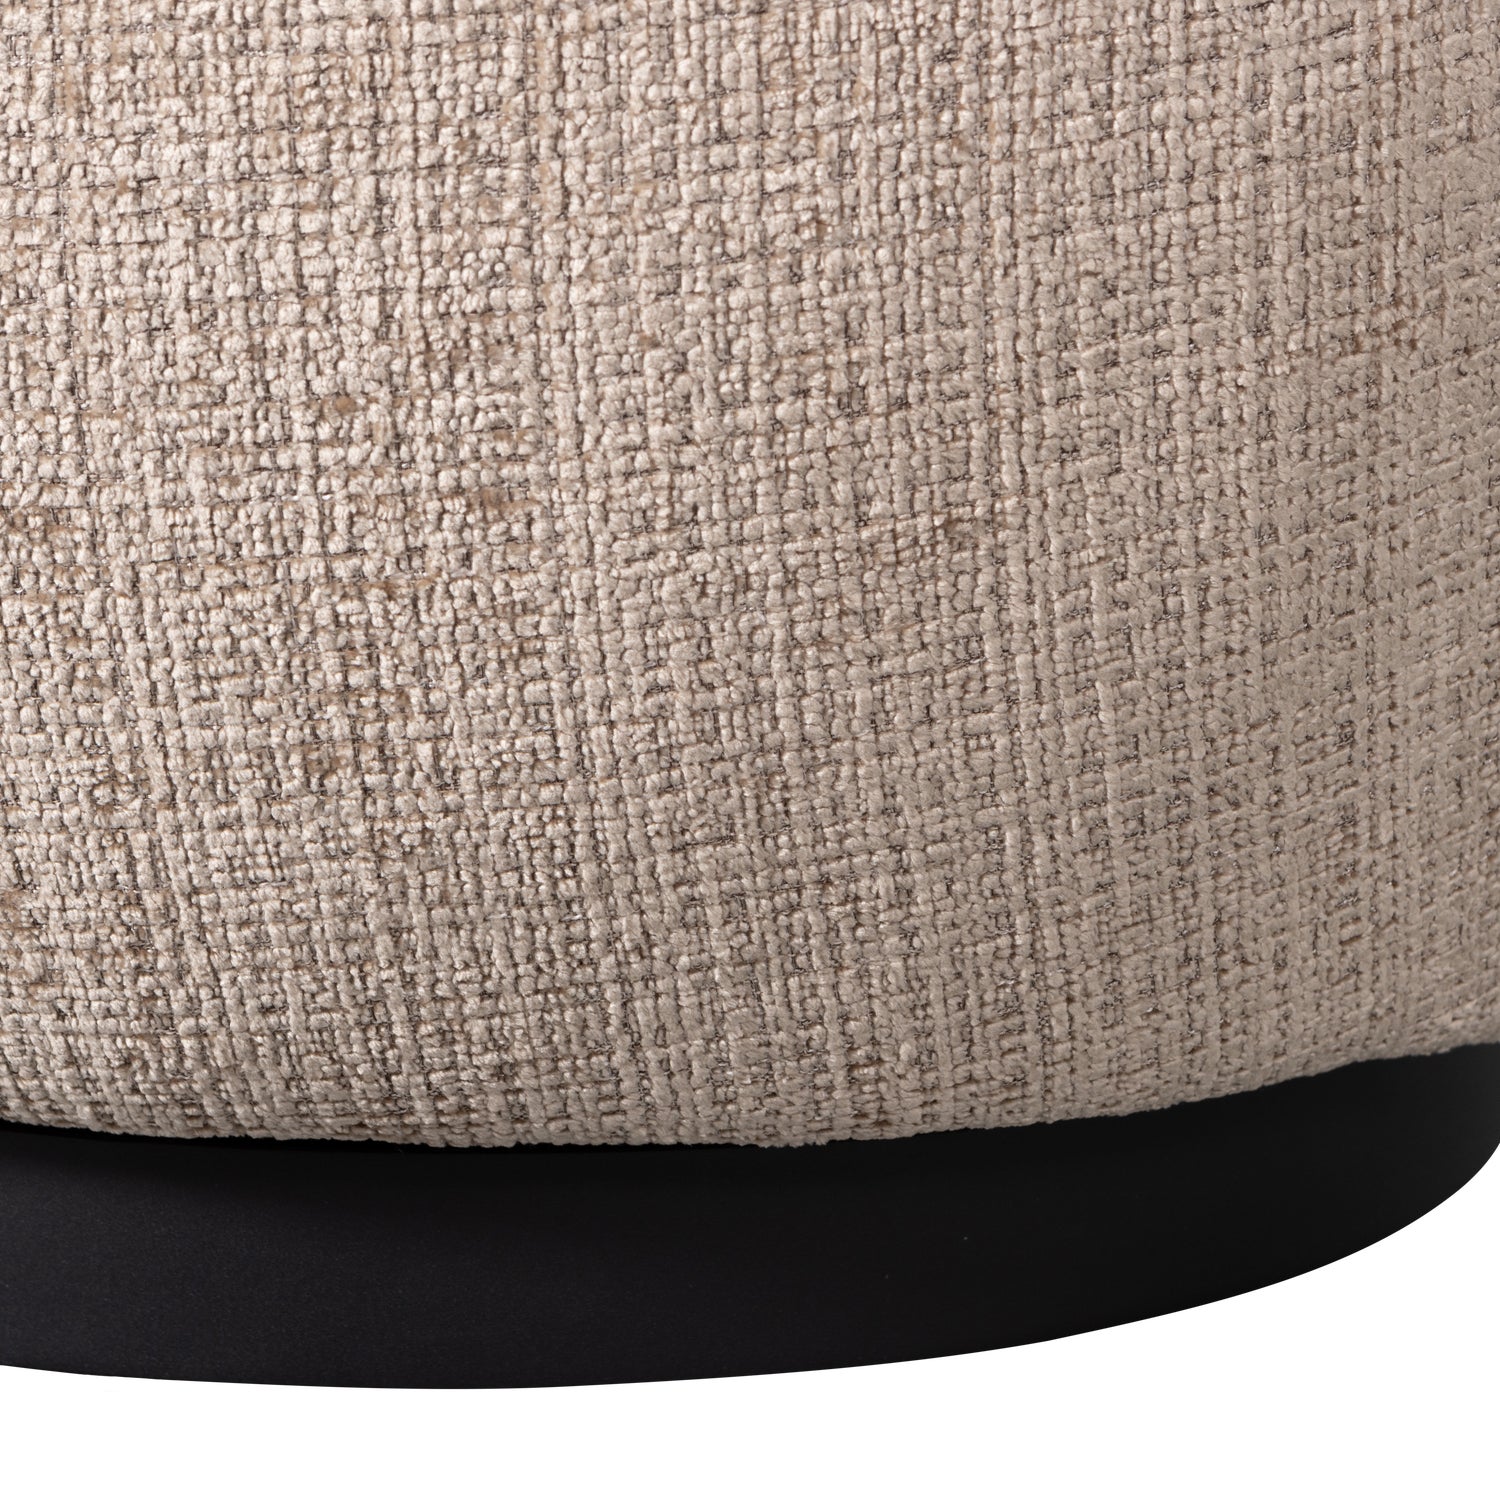 800037-S-01_VS_FA_Woolly_draaifauteuil_chenille_zand_detail.png?auto=webp&format=png&width=1500&height=1500